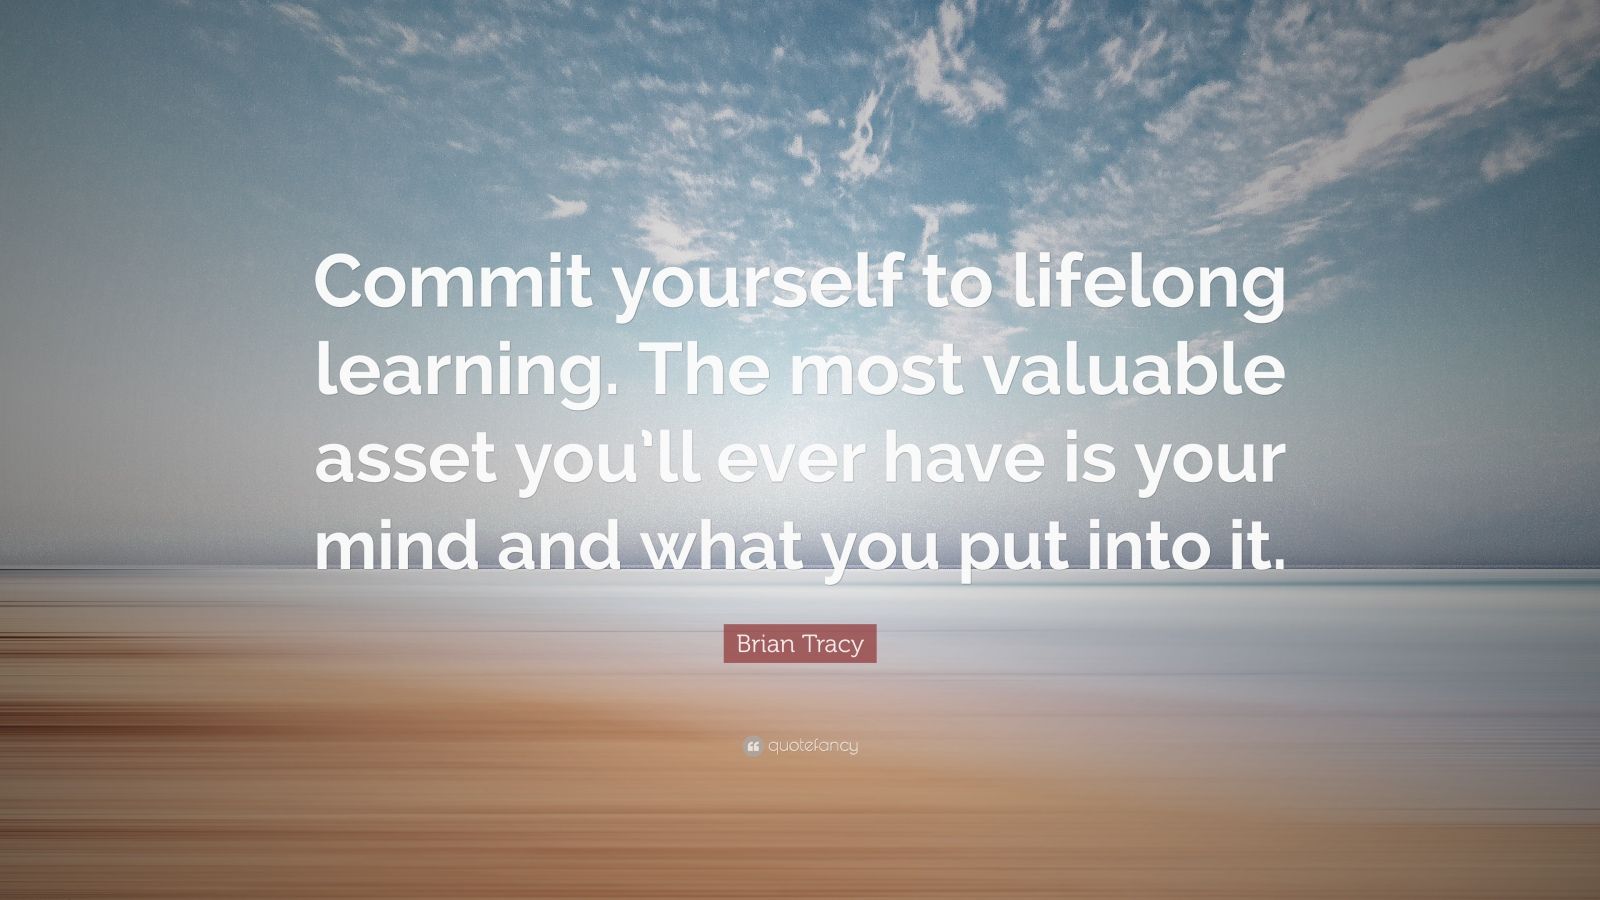 Brian Tracy Quote: “Commit yourself to lifelong learning. The most